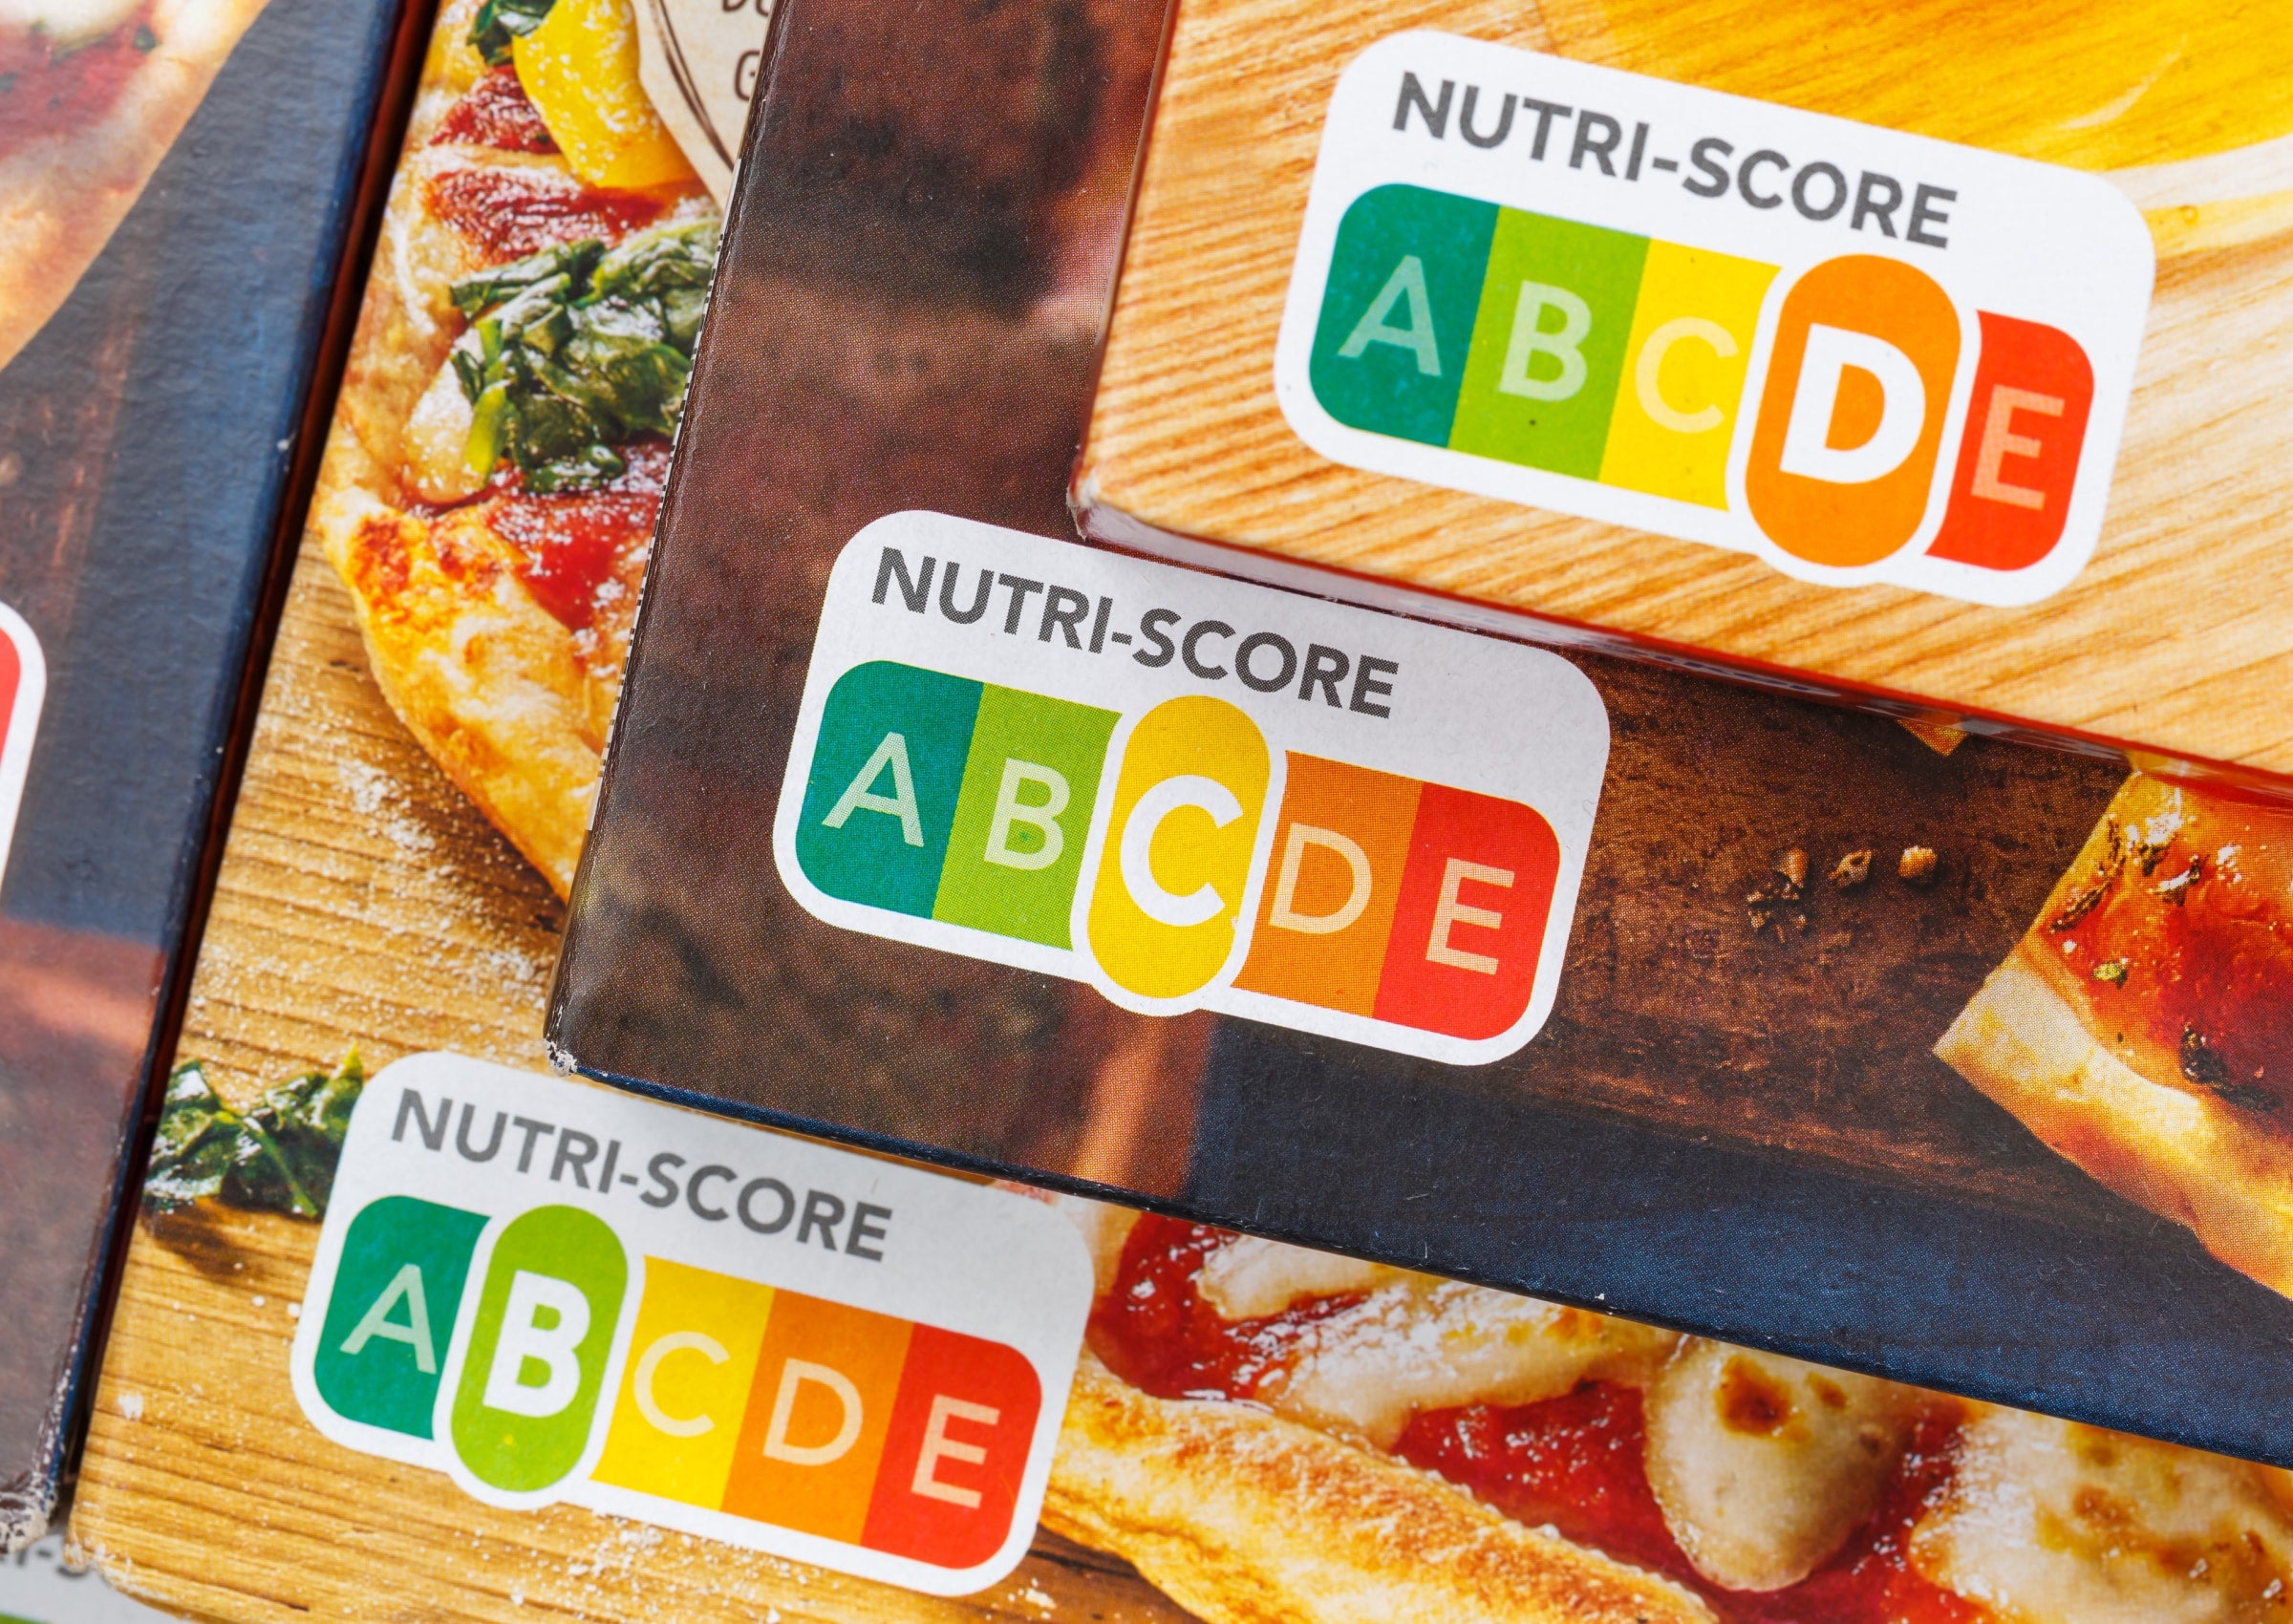 calorie and nutri-score labeling on food packaging